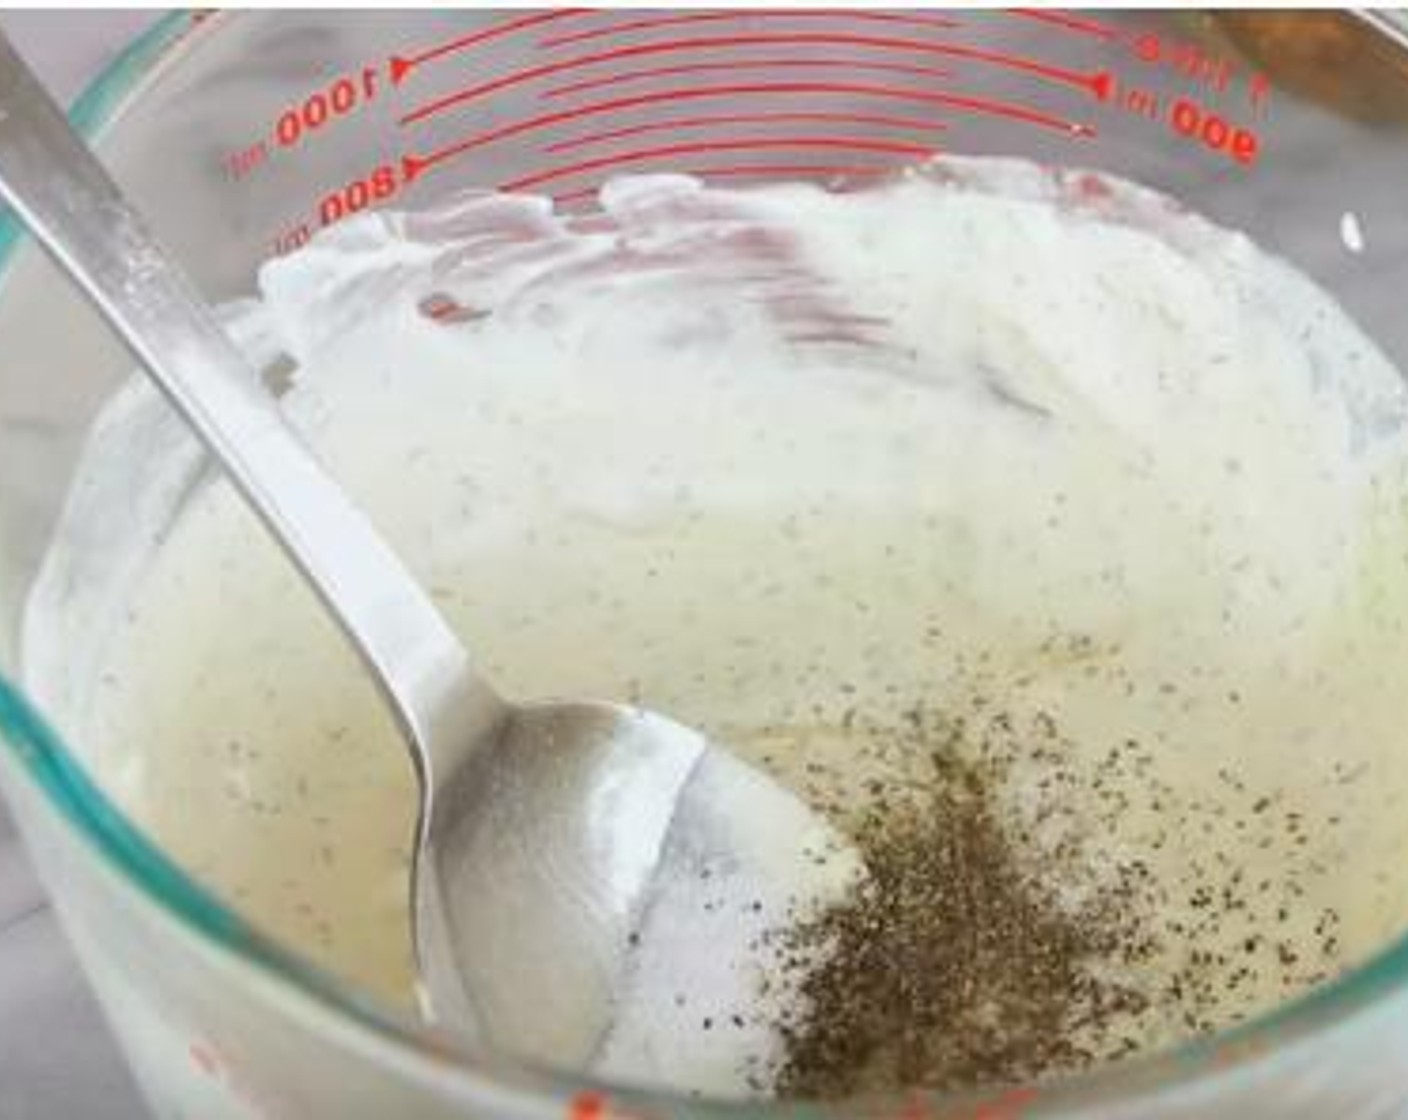 step 4 In a cup, mix together the Sour Cream (1/4 cup), Mayonnaise (1/2 cup), Dijon Mustard (1 Tbsp), Dried Dill Weed (1/2 tsp), Distilled White Vinegar (1 Tbsp), McCormick® Garlic Powder (1 tsp), Salt (to taste), and Ground Black Pepper (to taste).